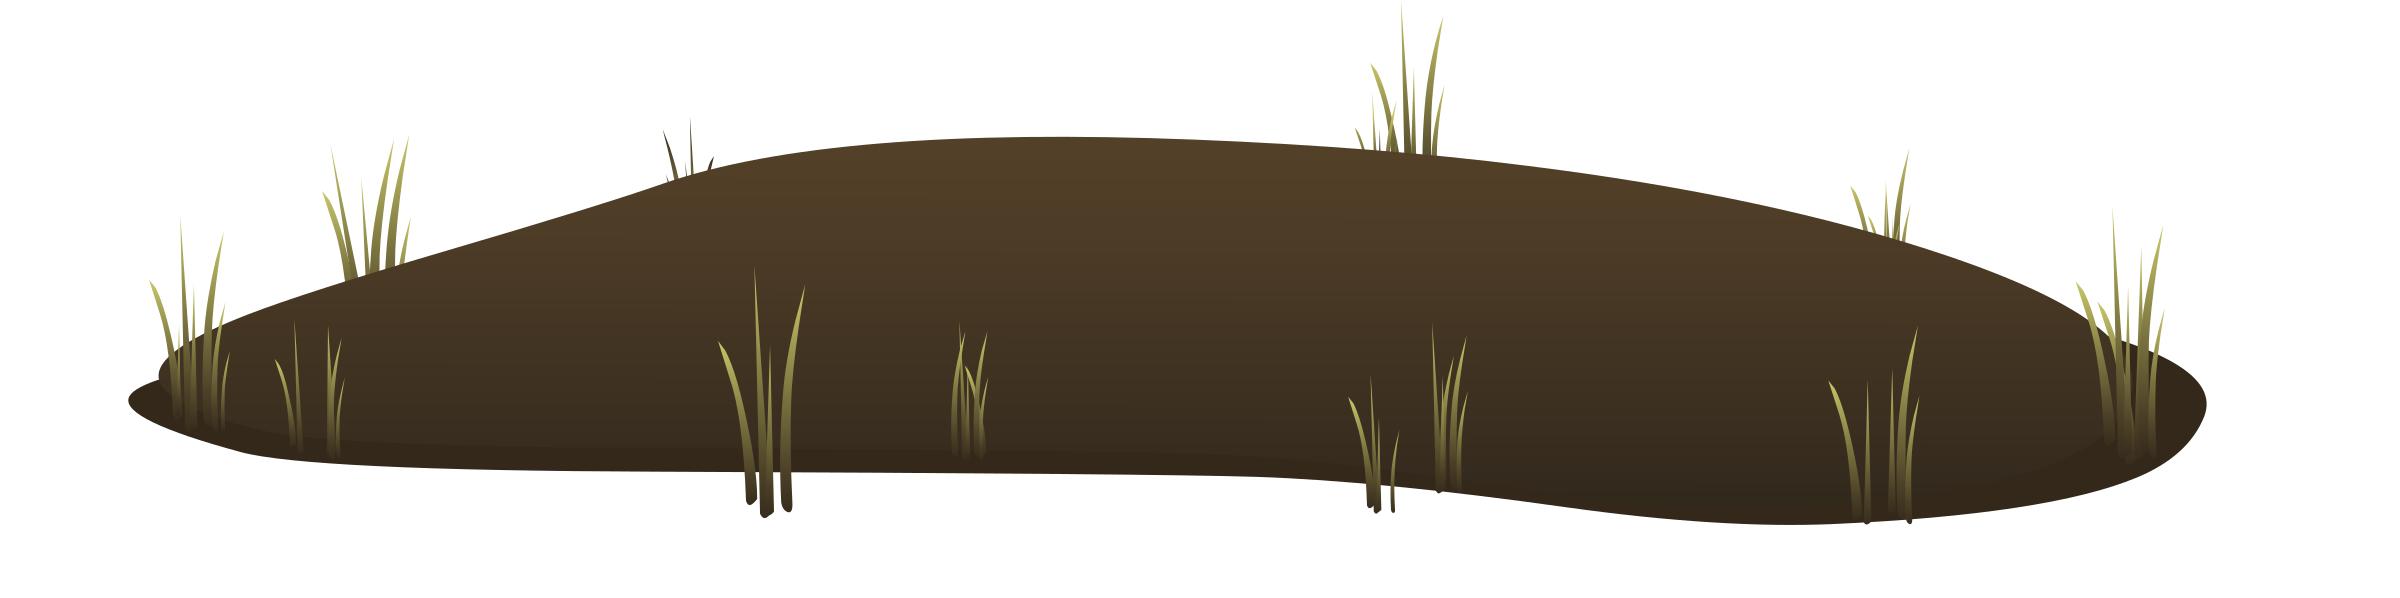 Harvestable Resources Peat 1 png